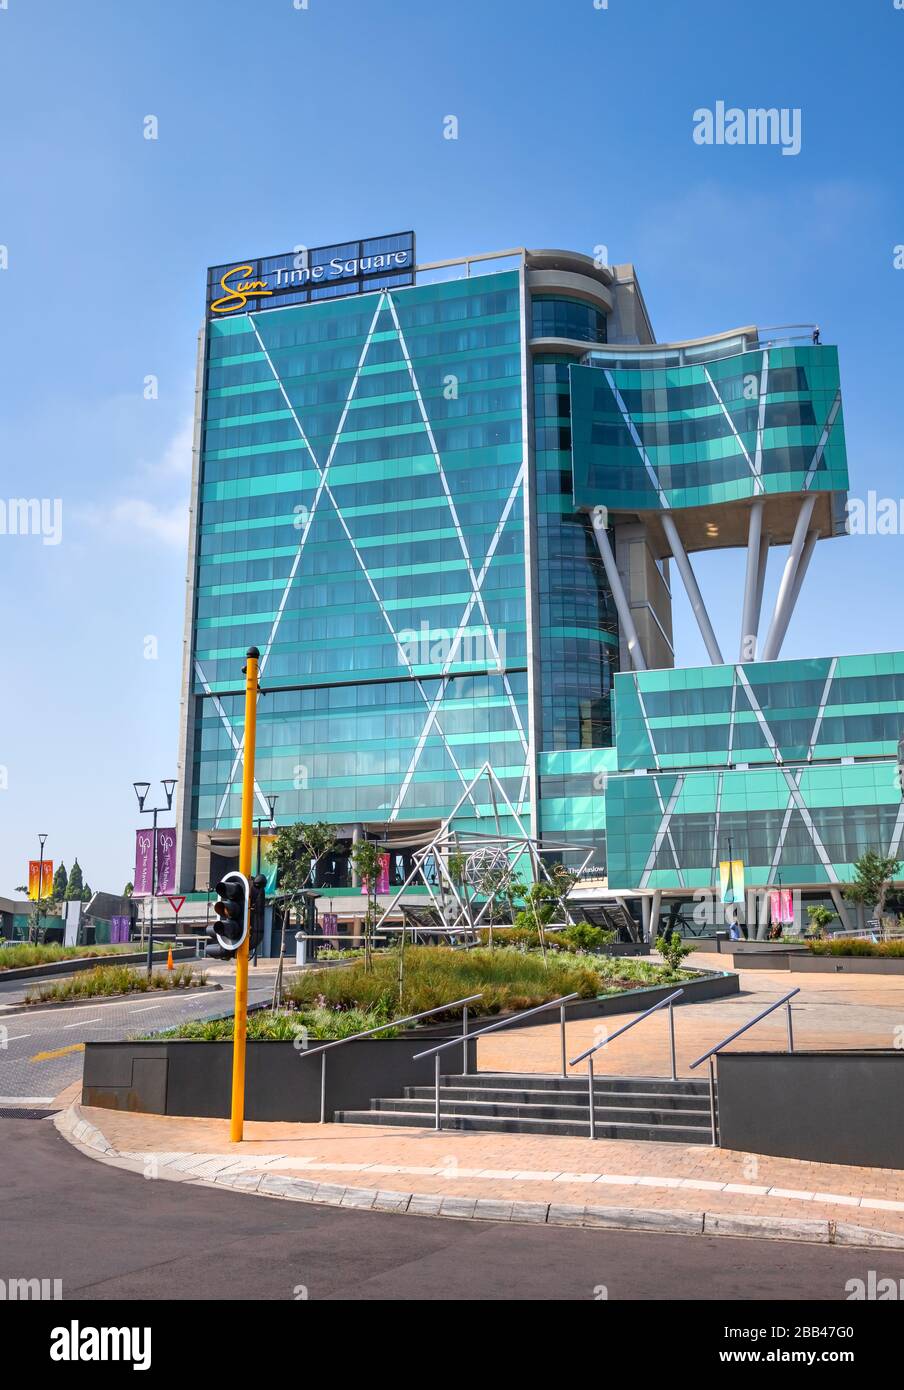 Pretoria, South Africa, 29th January - 2020: Glass facade of modern hotel and conference venue. Stock Photo